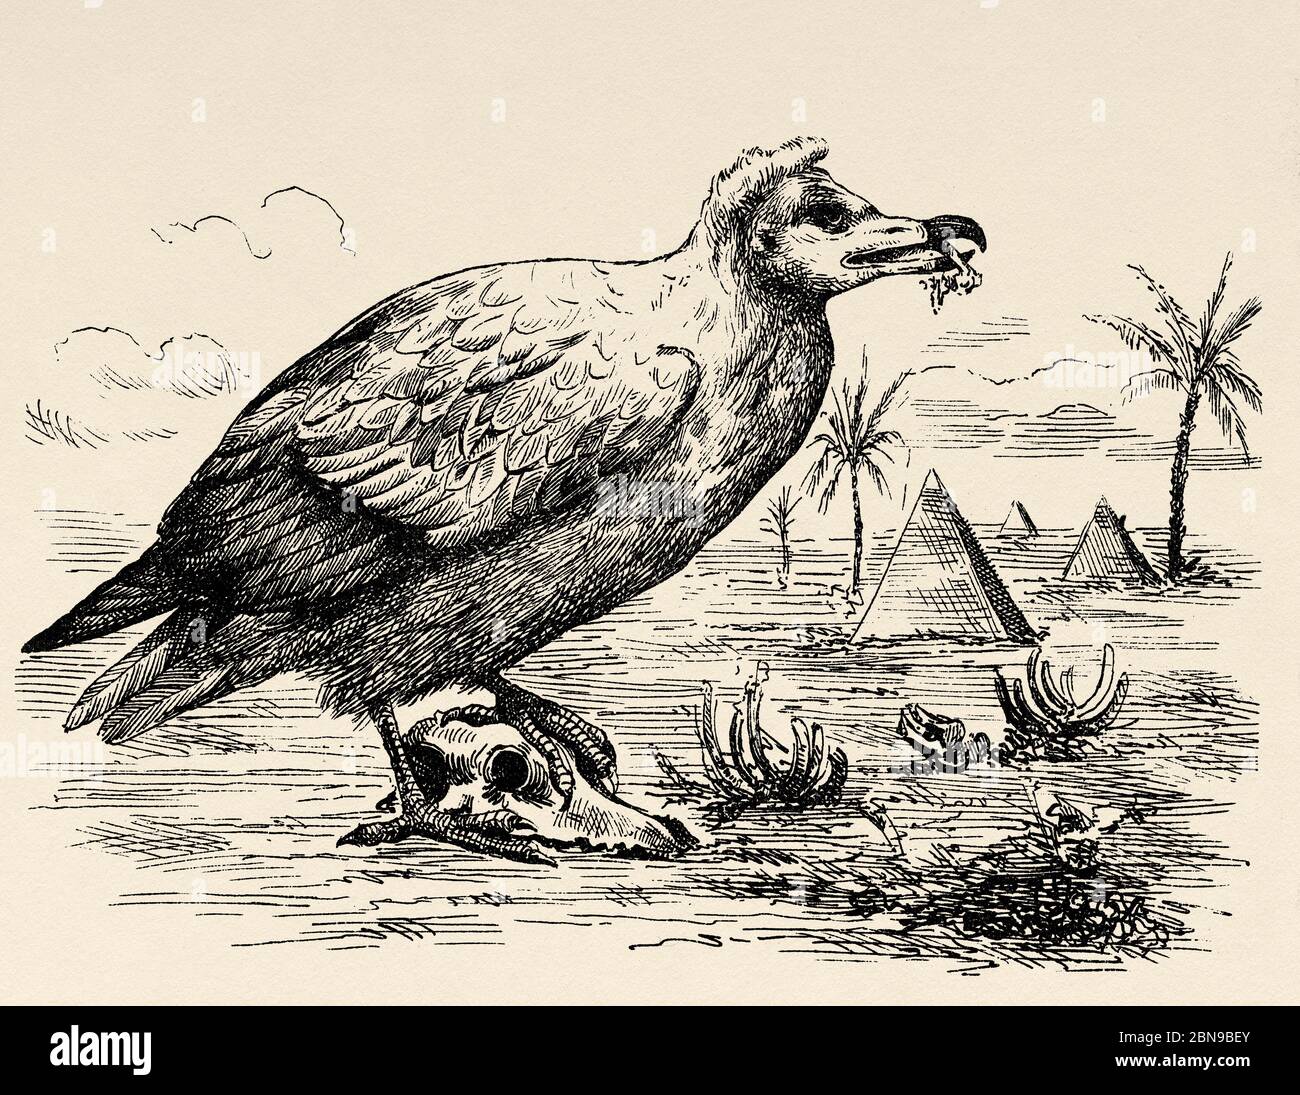 The Egyptian Egyptian vulture, abanto, guirre or vulture (Neophron percnopterus) is a species of accipitriform bird of the Accipitridae family typical of Africa and the southern part of the Palearctic region up to India. Old engraved animal illustration 19th century Stock Photo